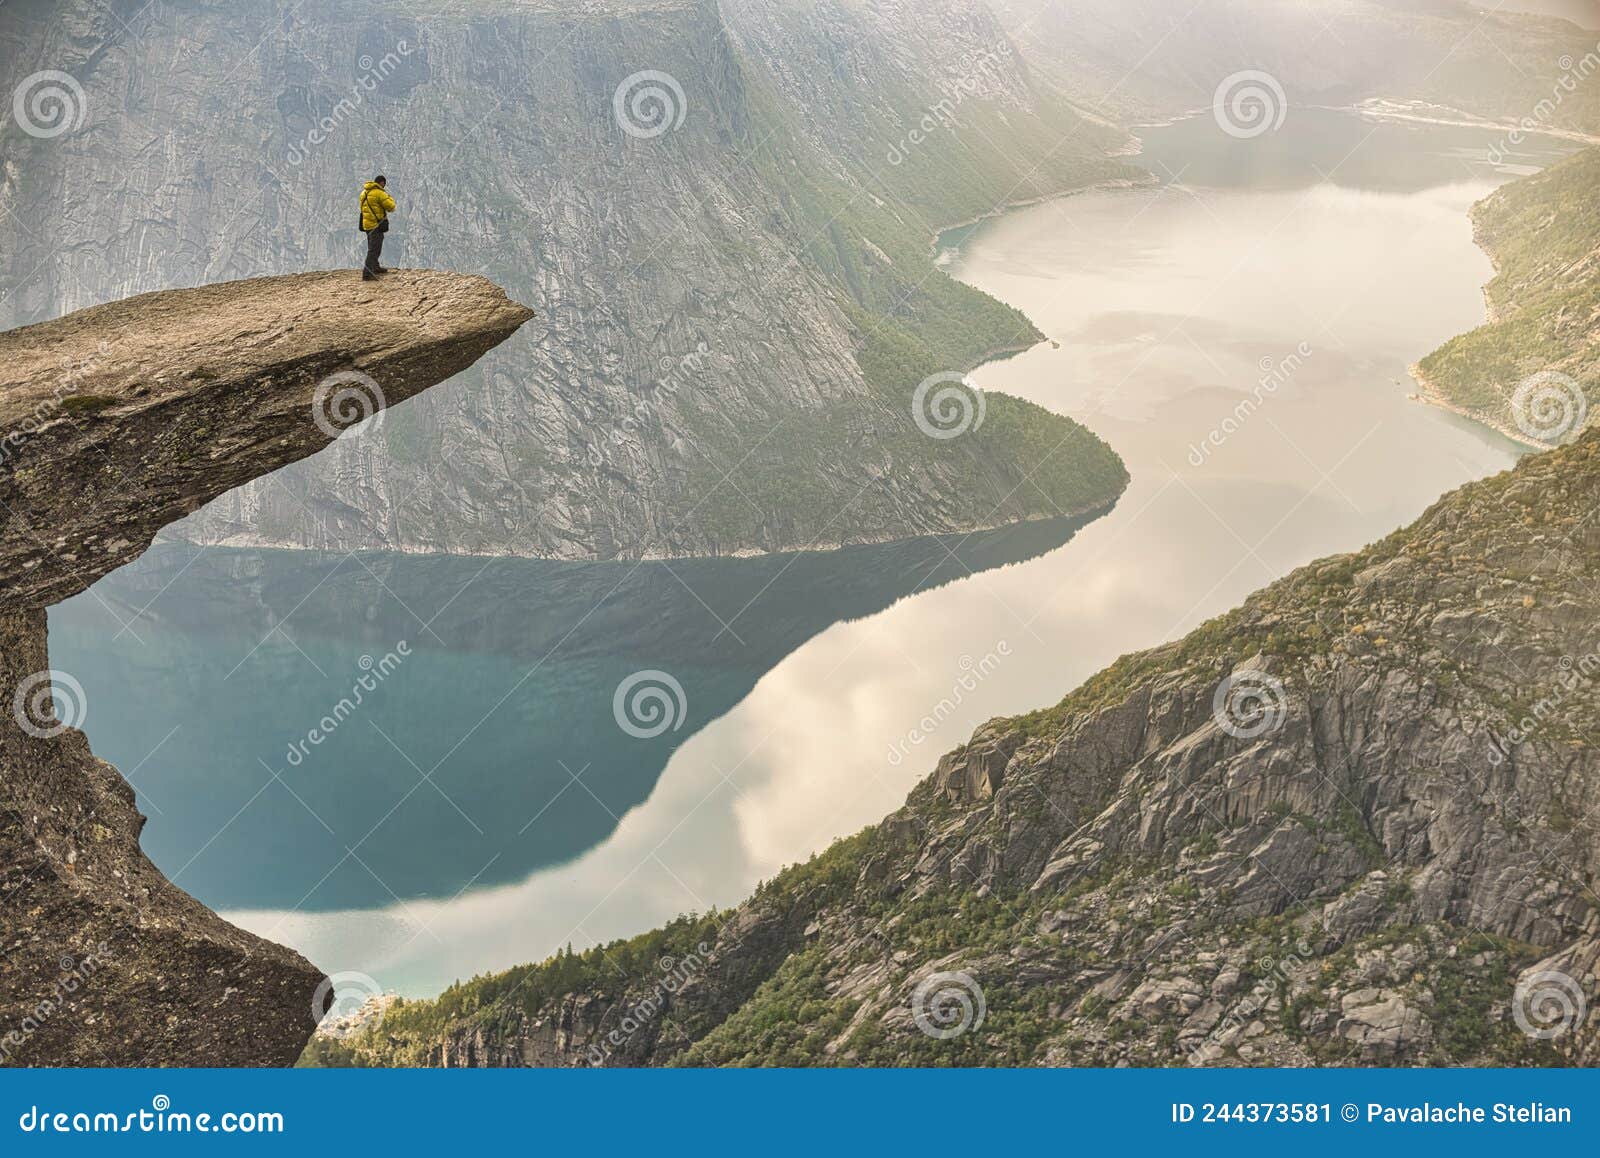 panoramic view of picturesque view of trolltunga and the fjord underneath